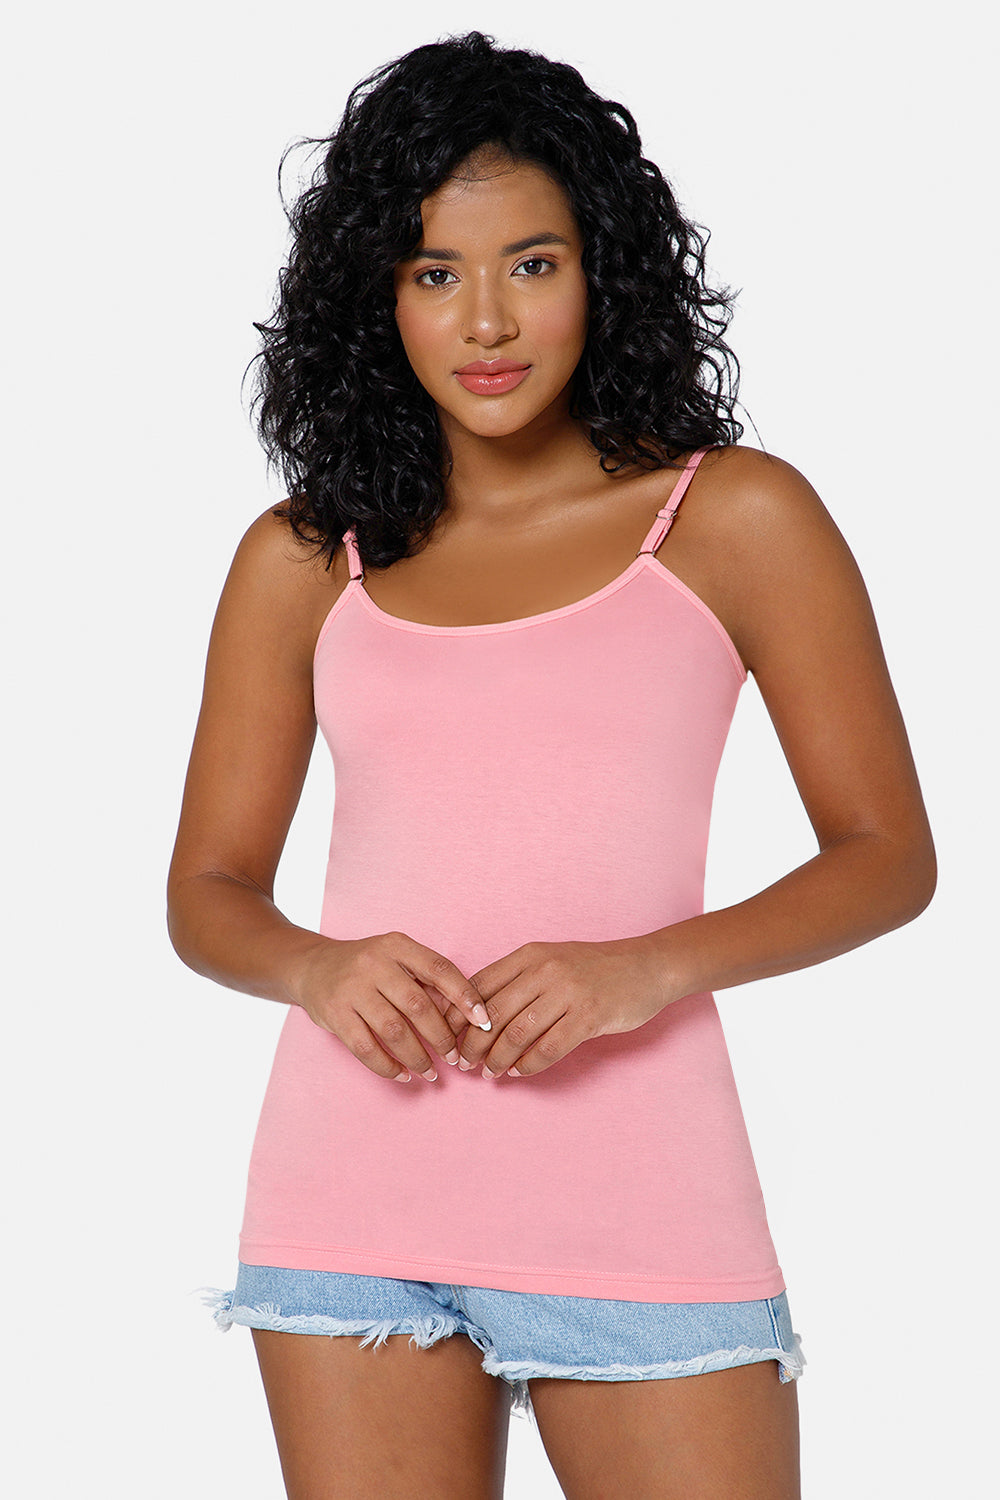 Full Coverage Non-Wired Non-Padded Cotton Intimacy Slip Camisole - IN08